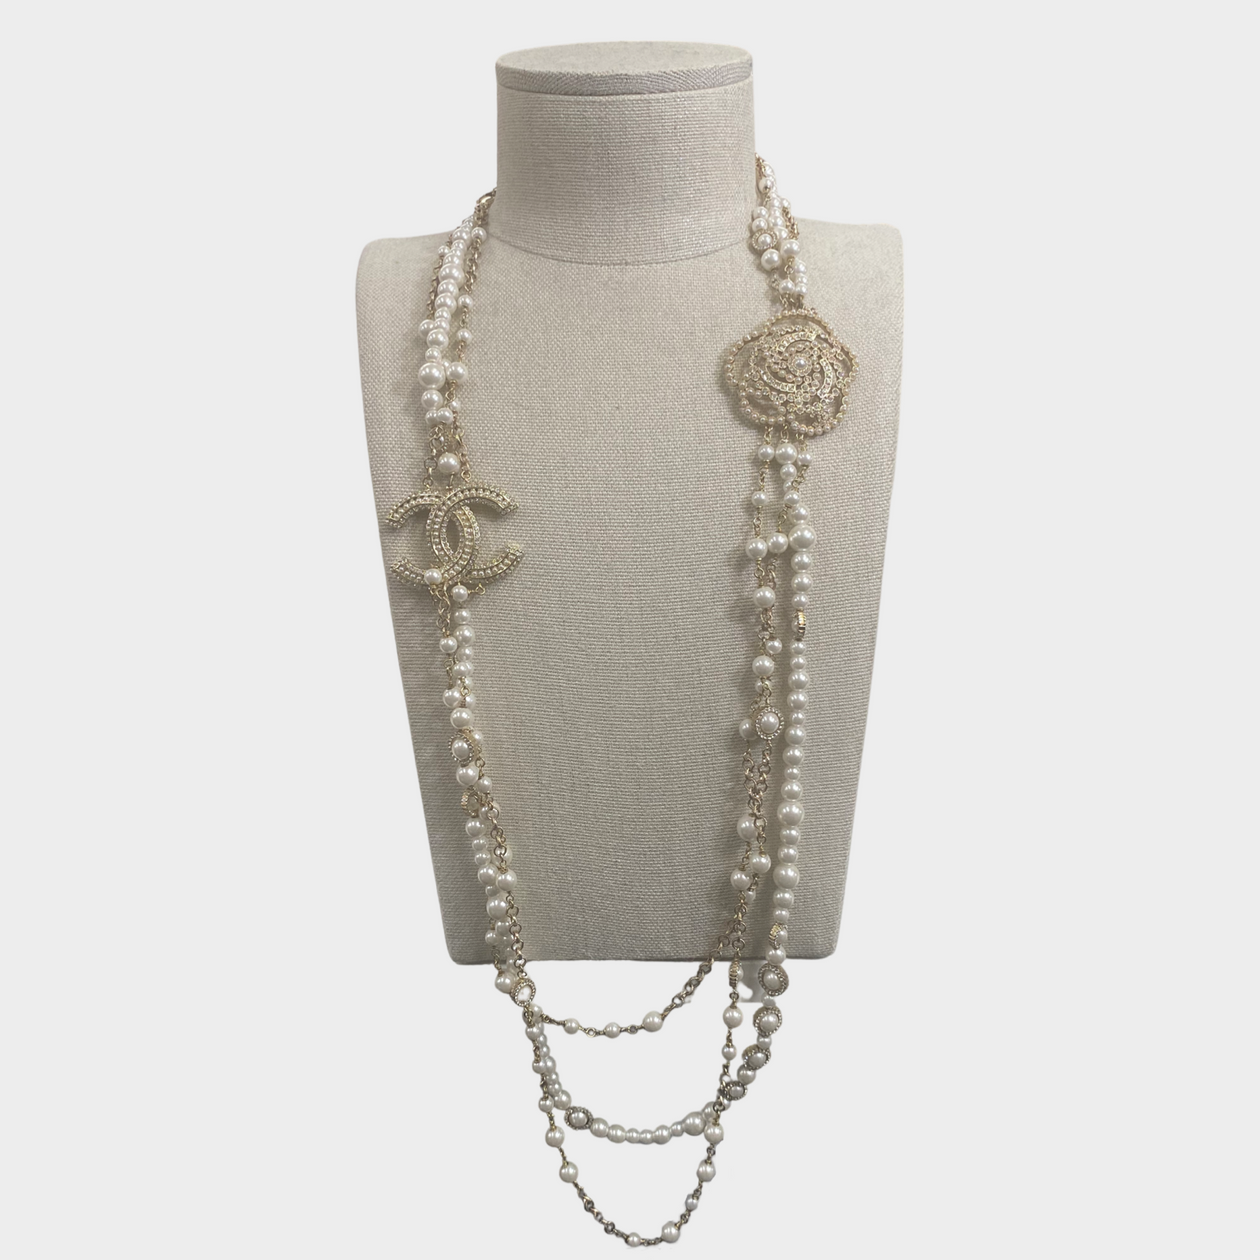 Chanel women's triple layer gold pearl necklace with diamante CC